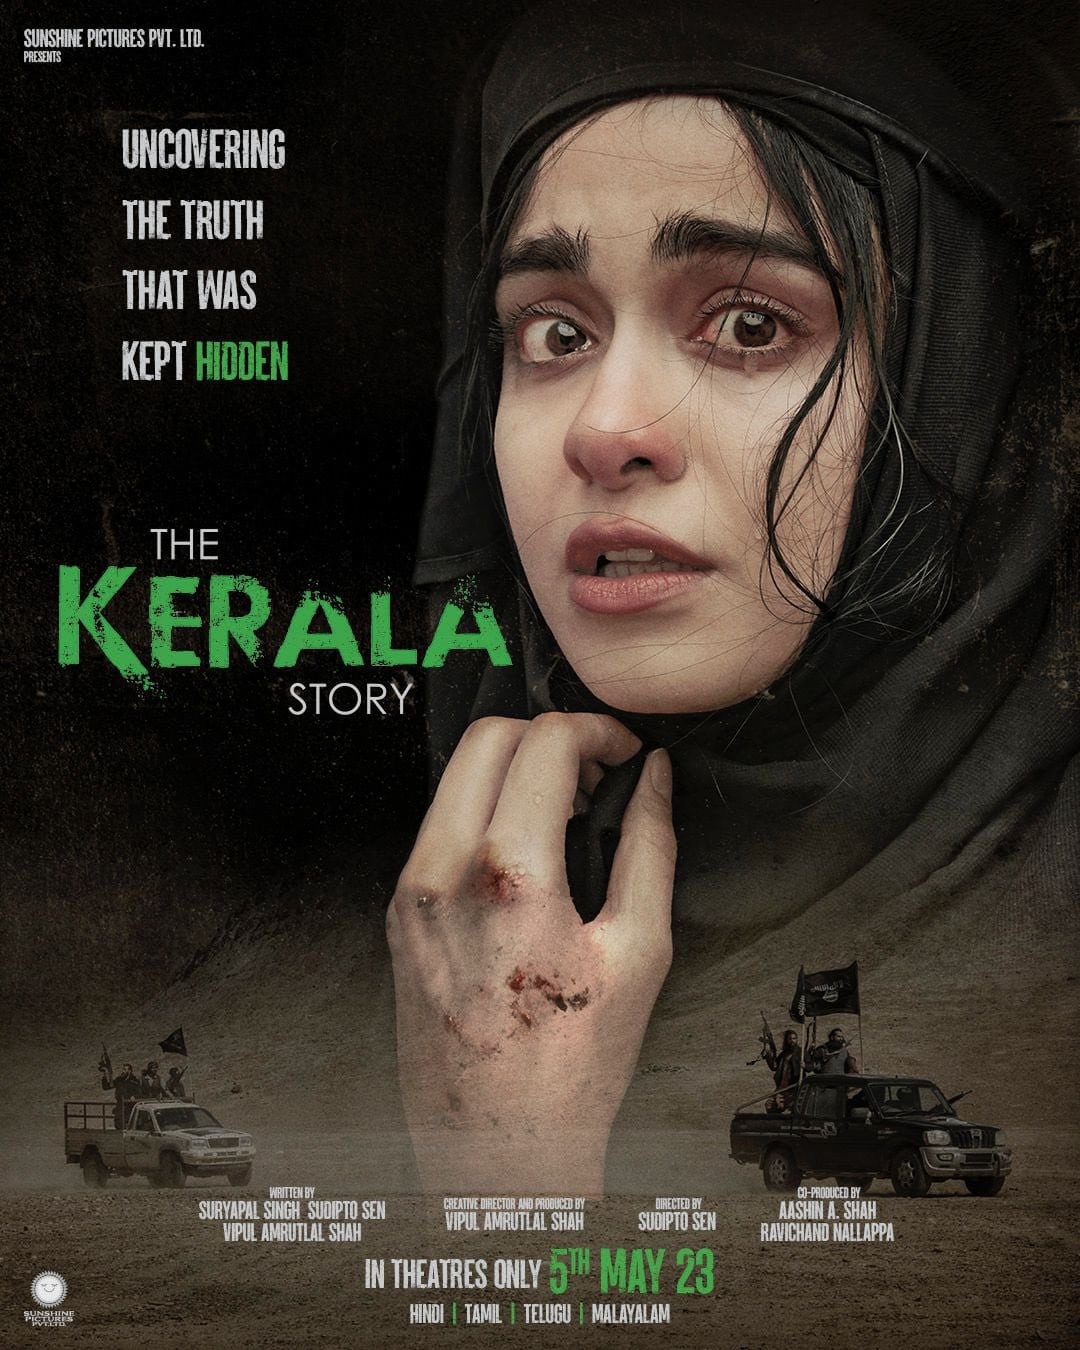 The Kerala Story Download Movie online watch for free